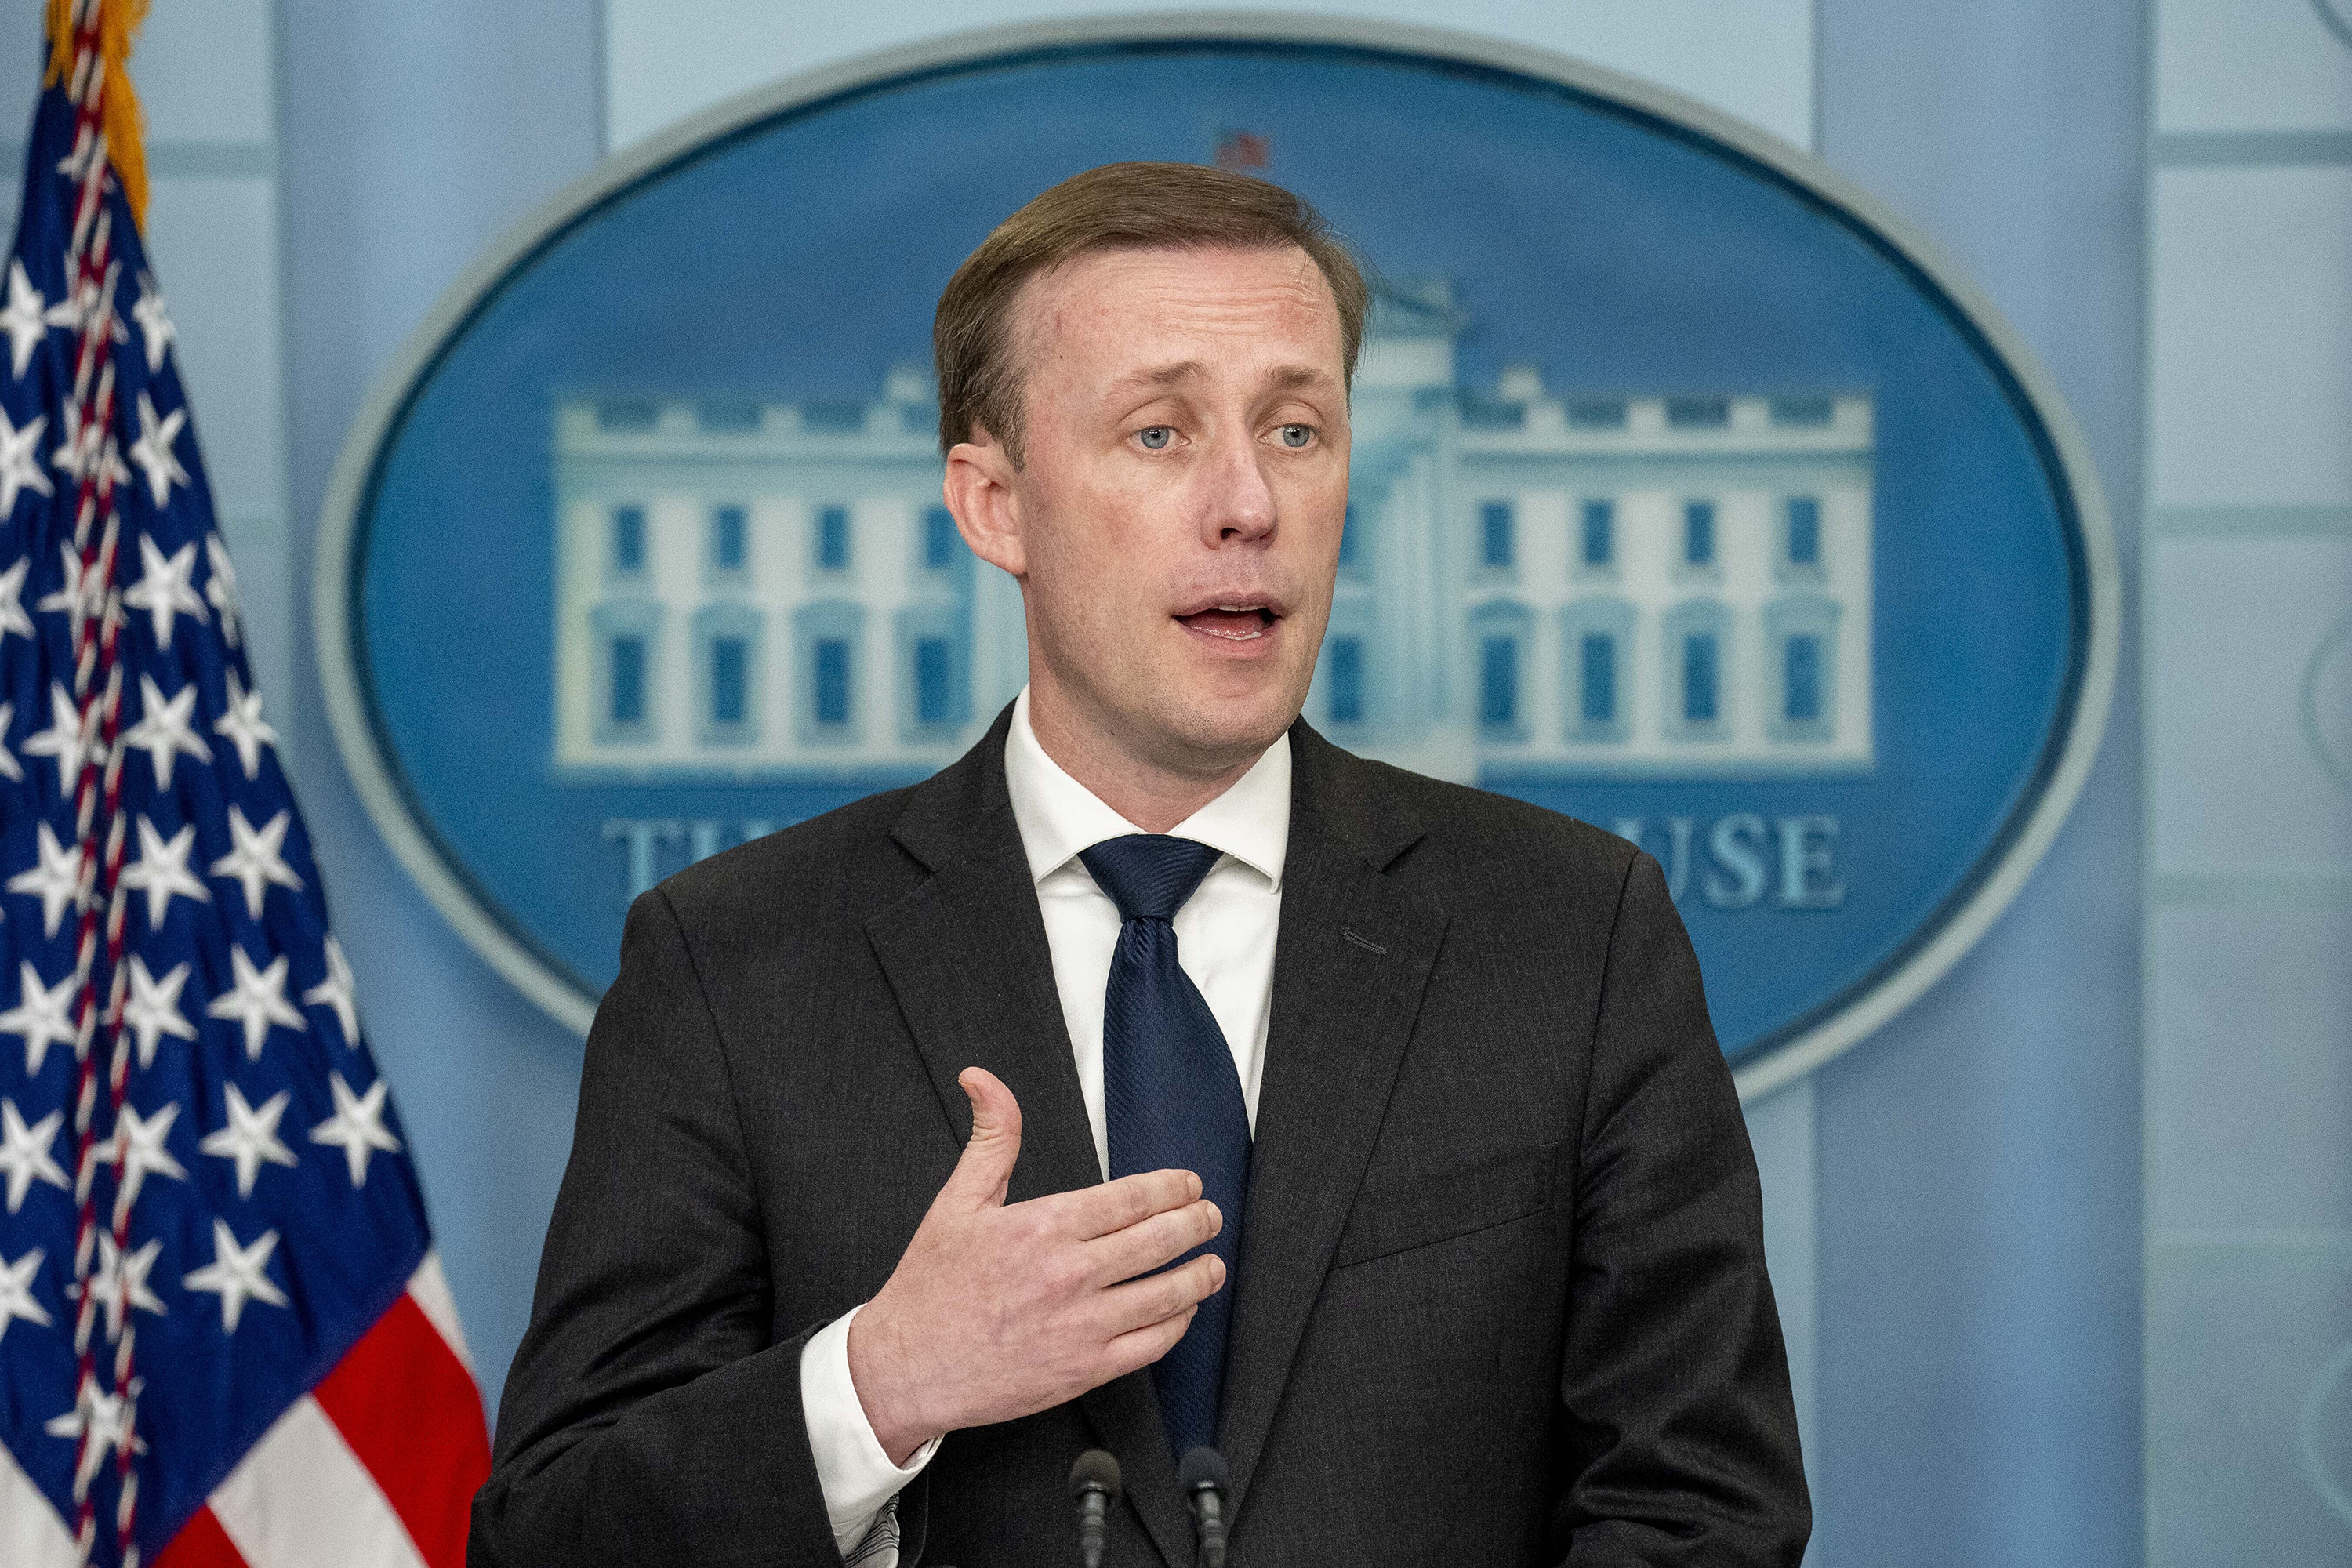 US announces new security aid package for Ukraine, national security adviser Jake Sullivan said at a press briefing at the White House, on Thursday, November 10.